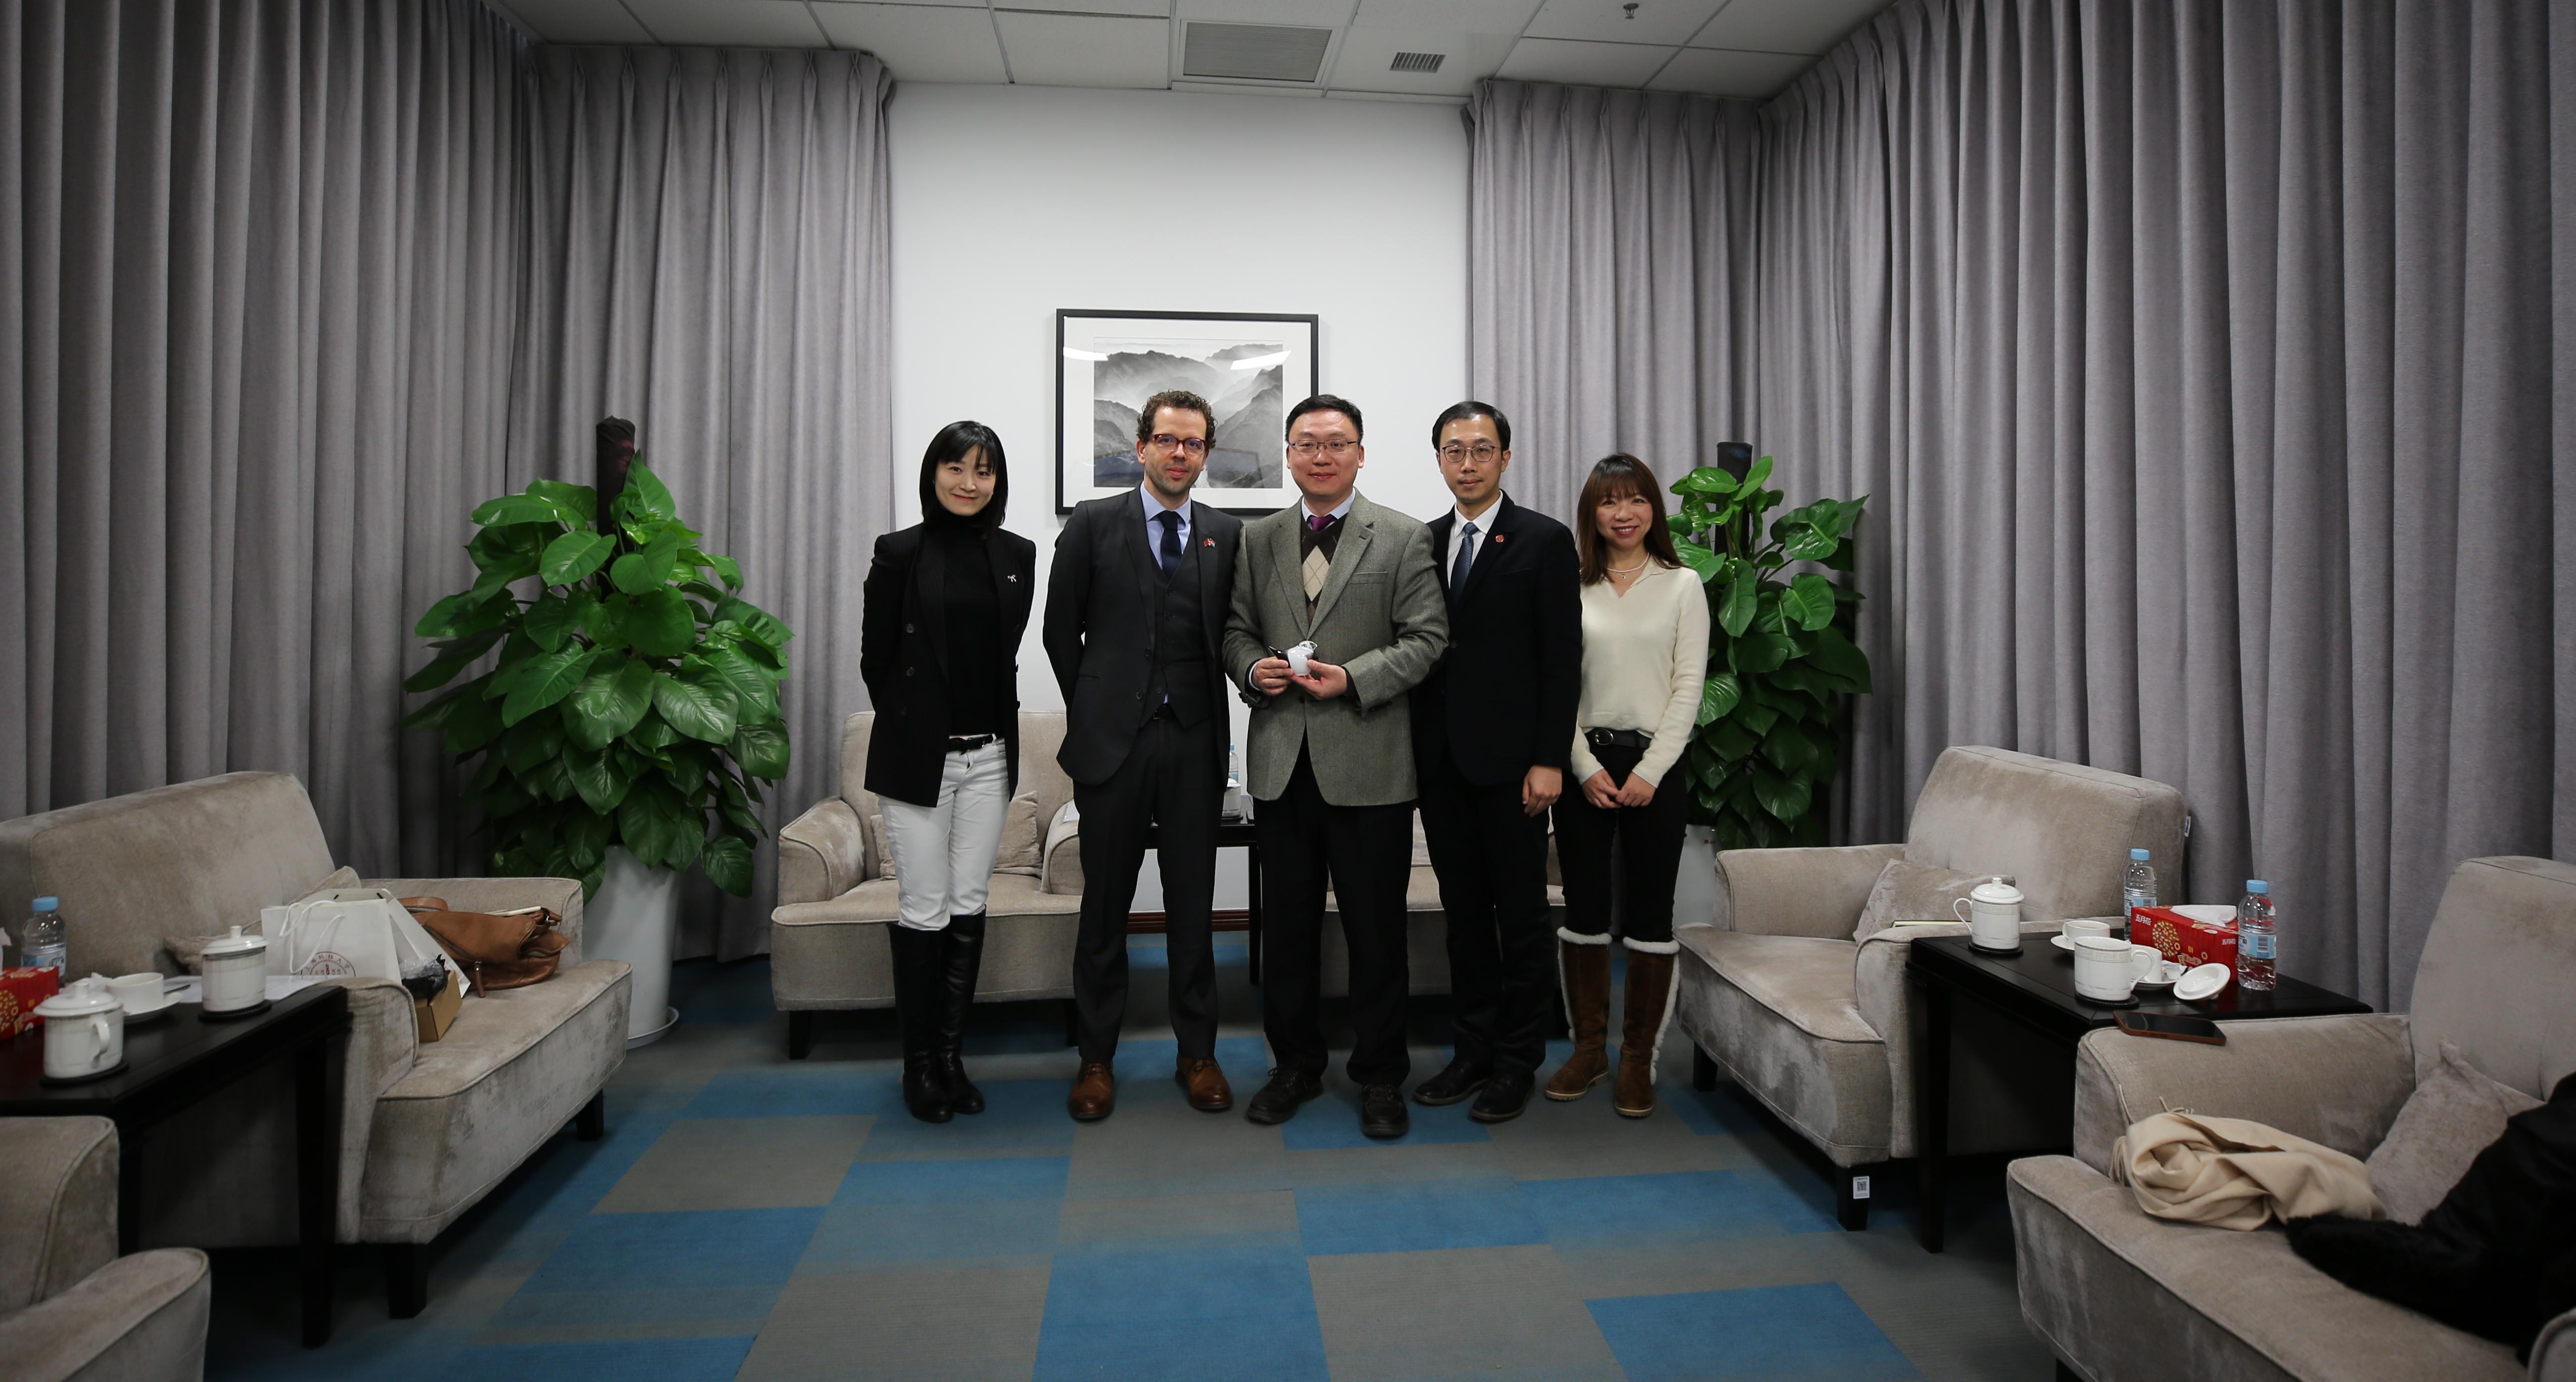 Consul General of Luxembourg in Shanghai visited ShanghaiTech University